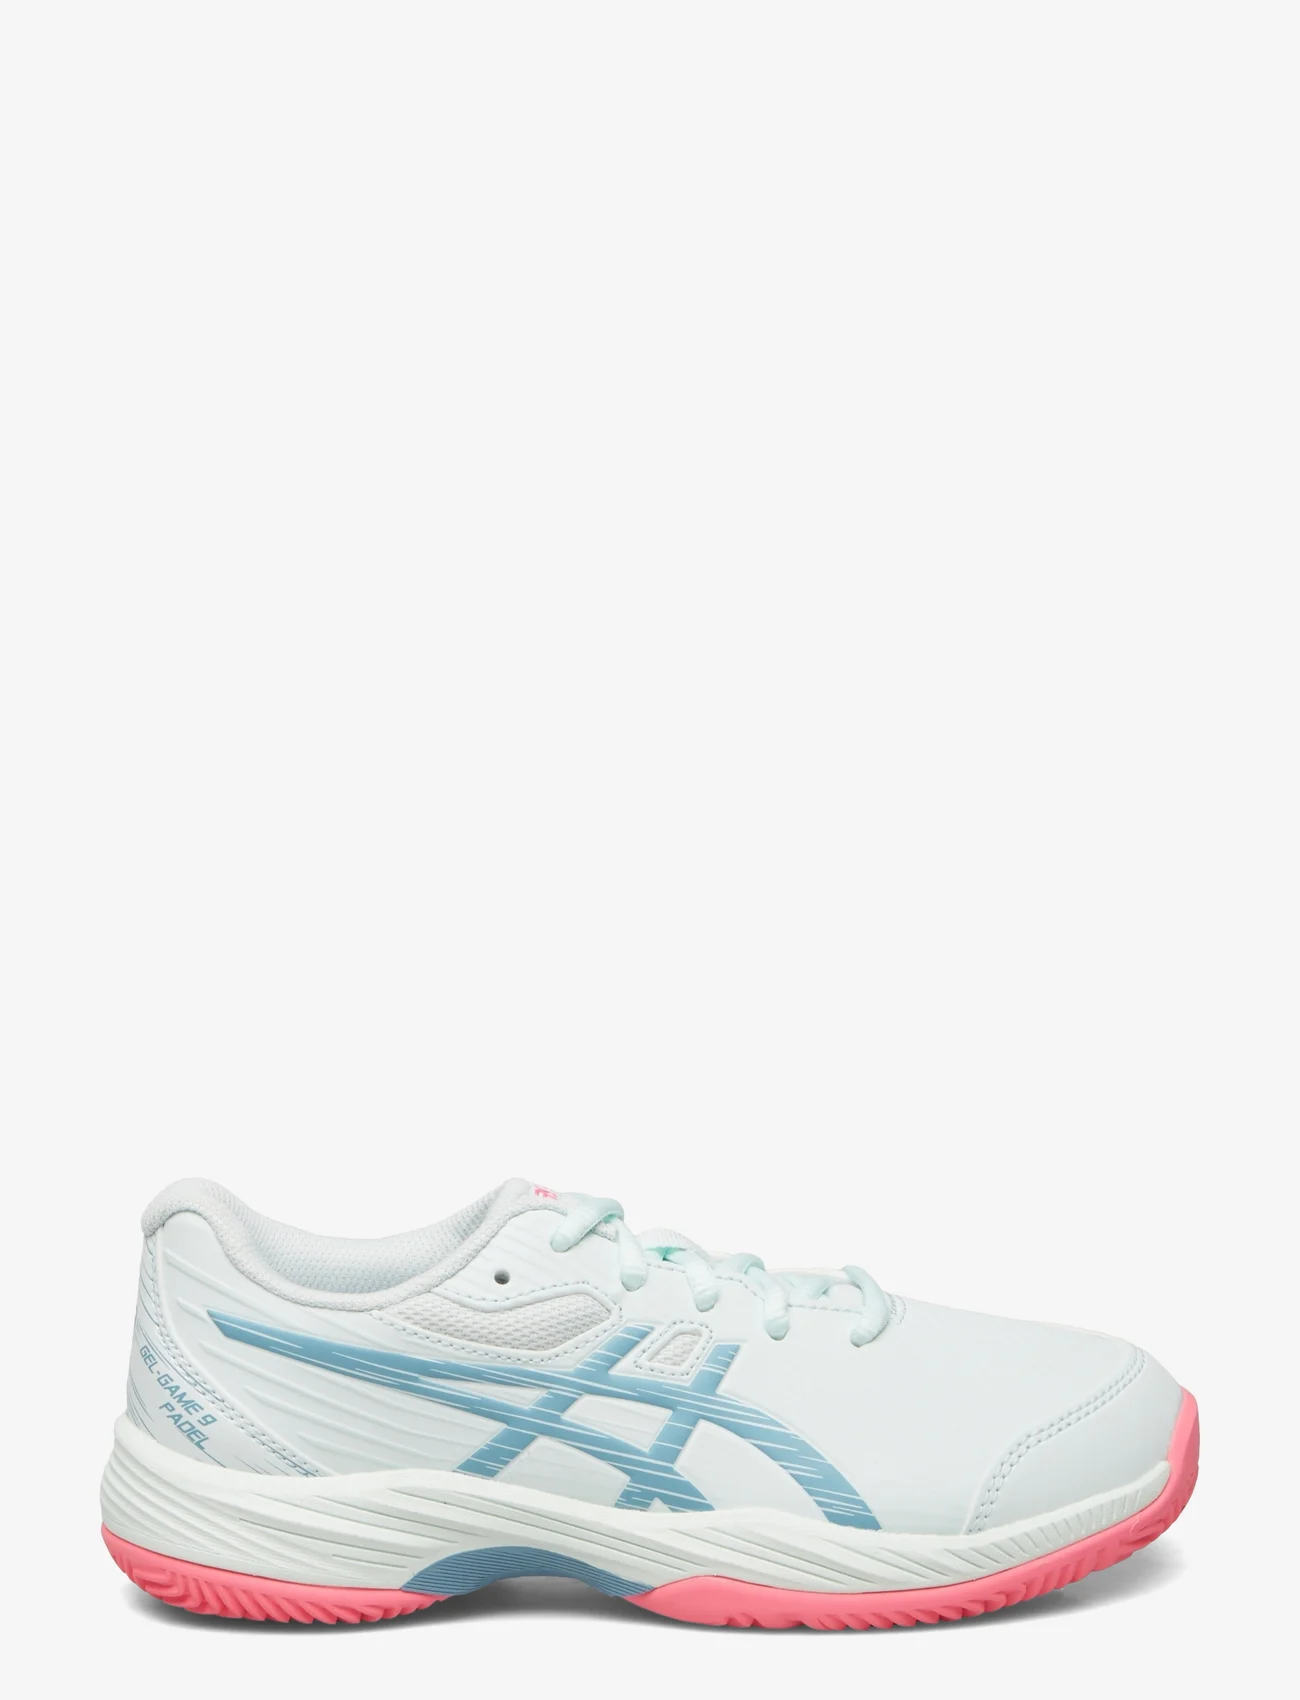 Asics - GEL-GAME 9 PADEL GS - trainingsschuhe - soothing sea/gris blue - 1